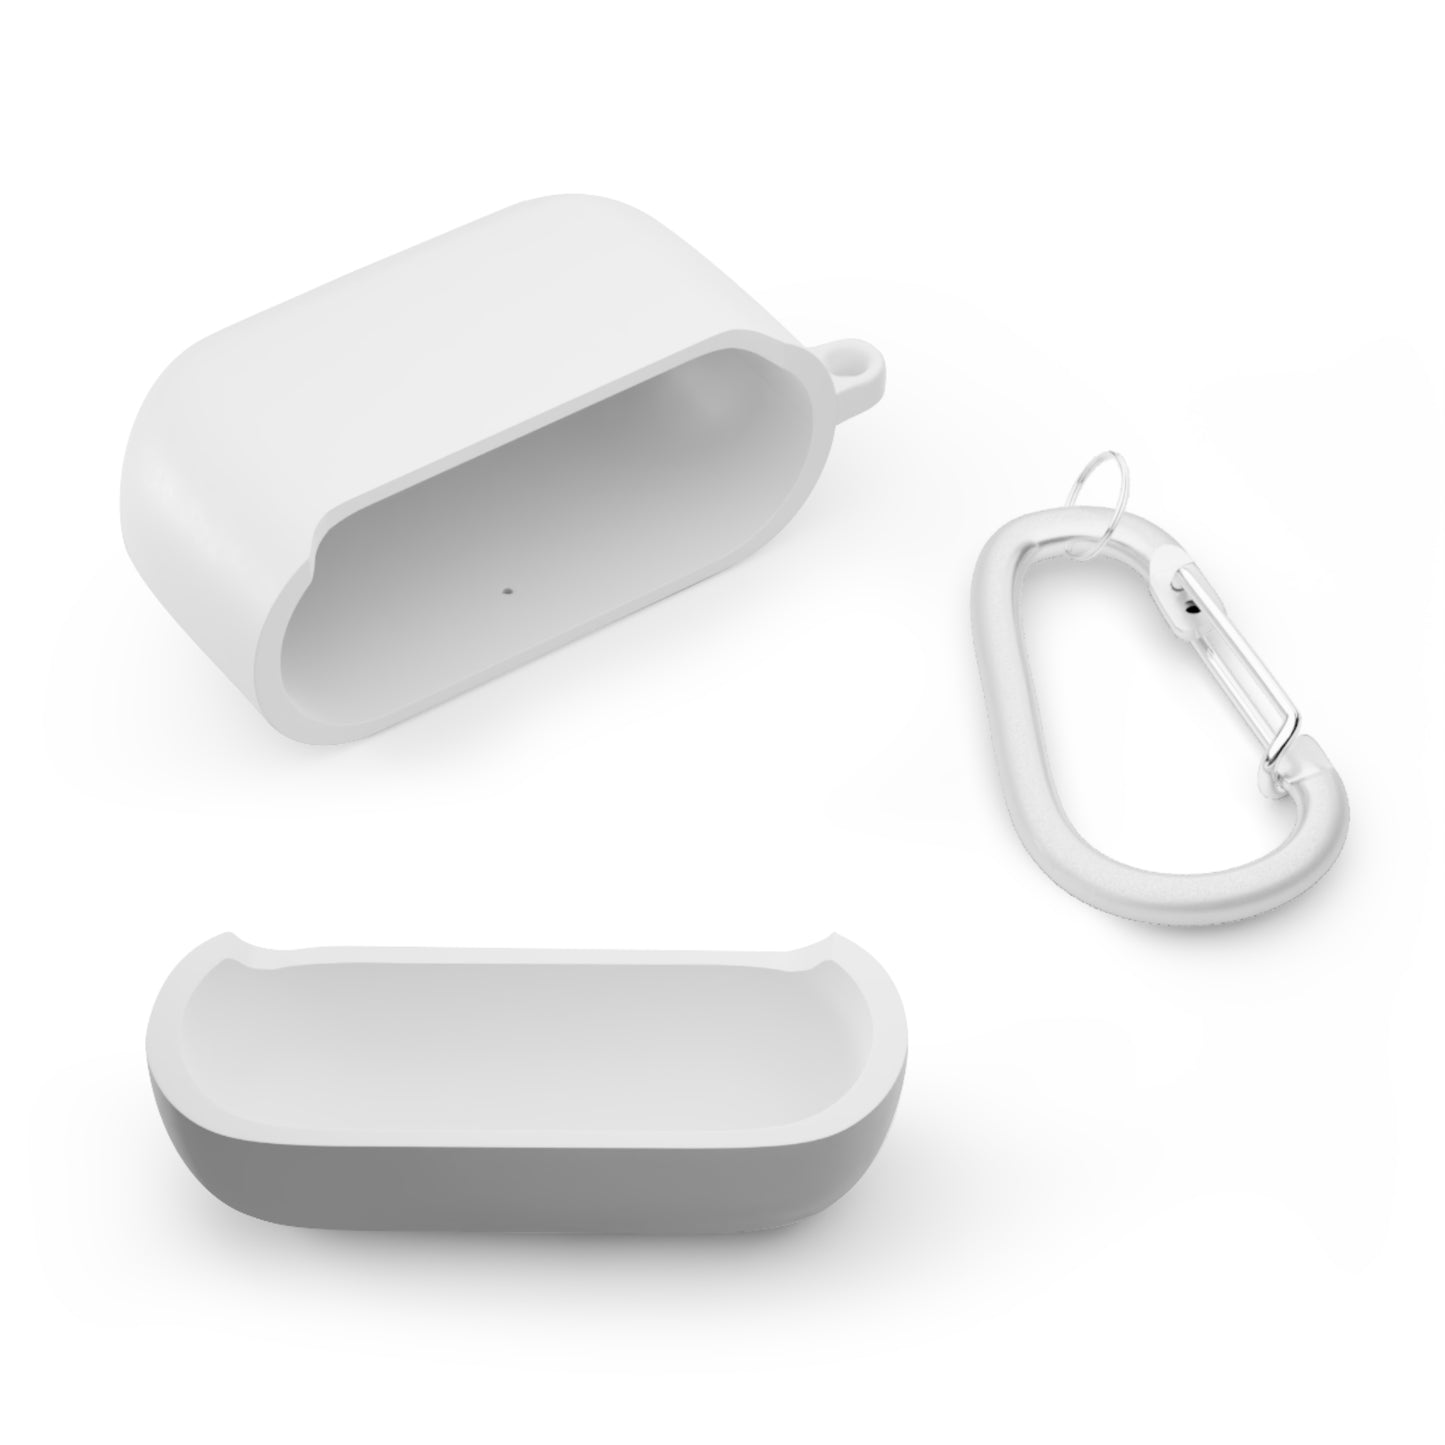 AirPods / AirPods Pro Case Cover - Sorry, I'm Dead